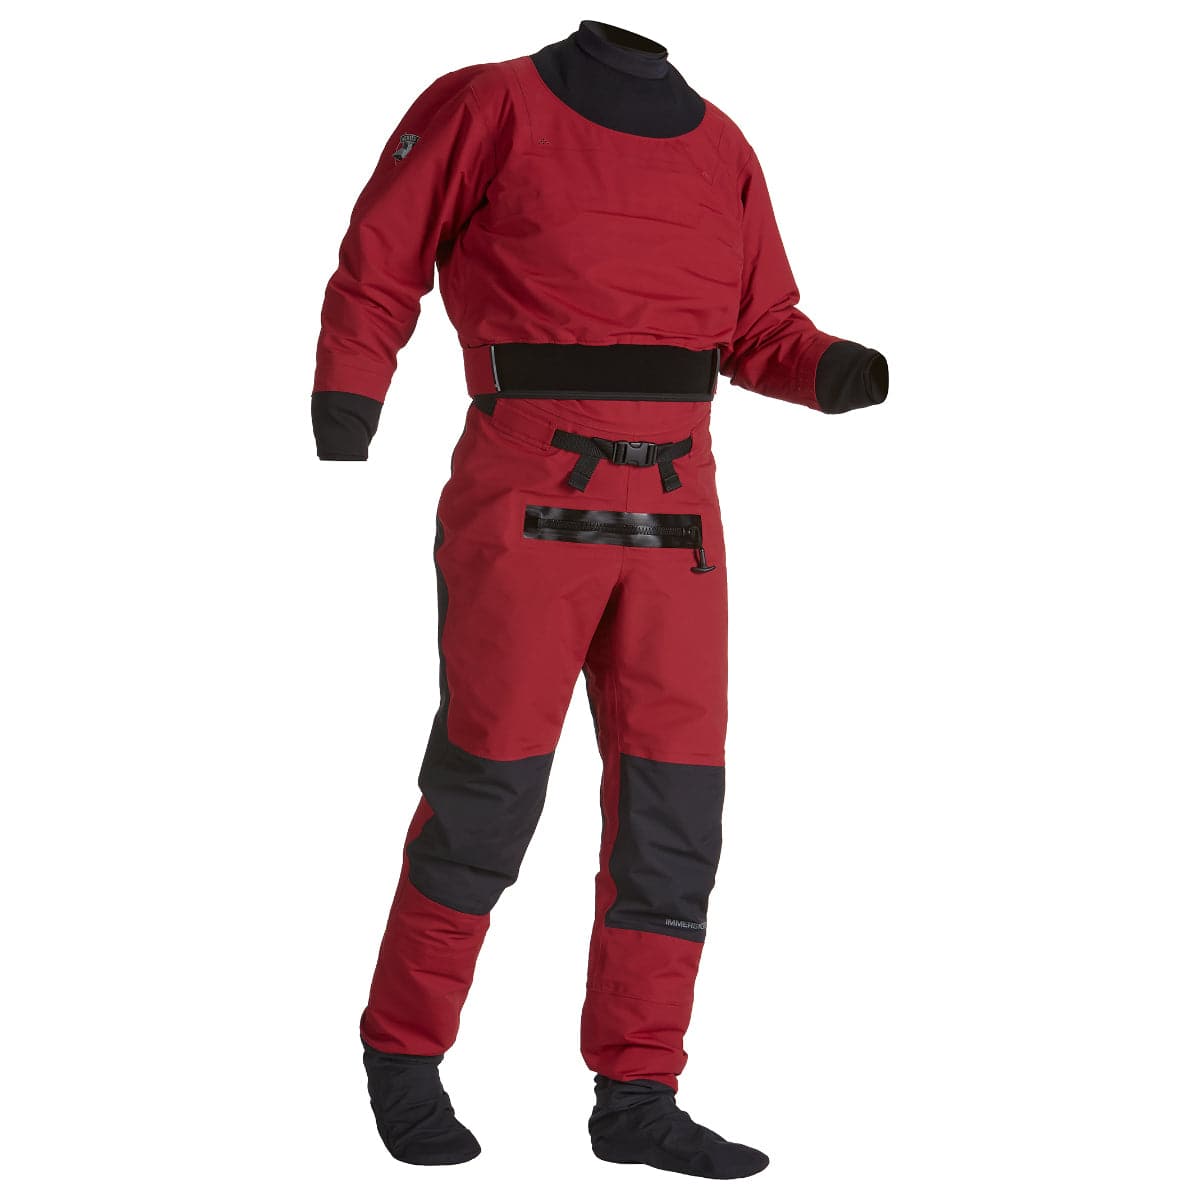 Featuring the Devils Club Drysuit men's dry wear manufactured by Immersion Research shown here from a third angle.